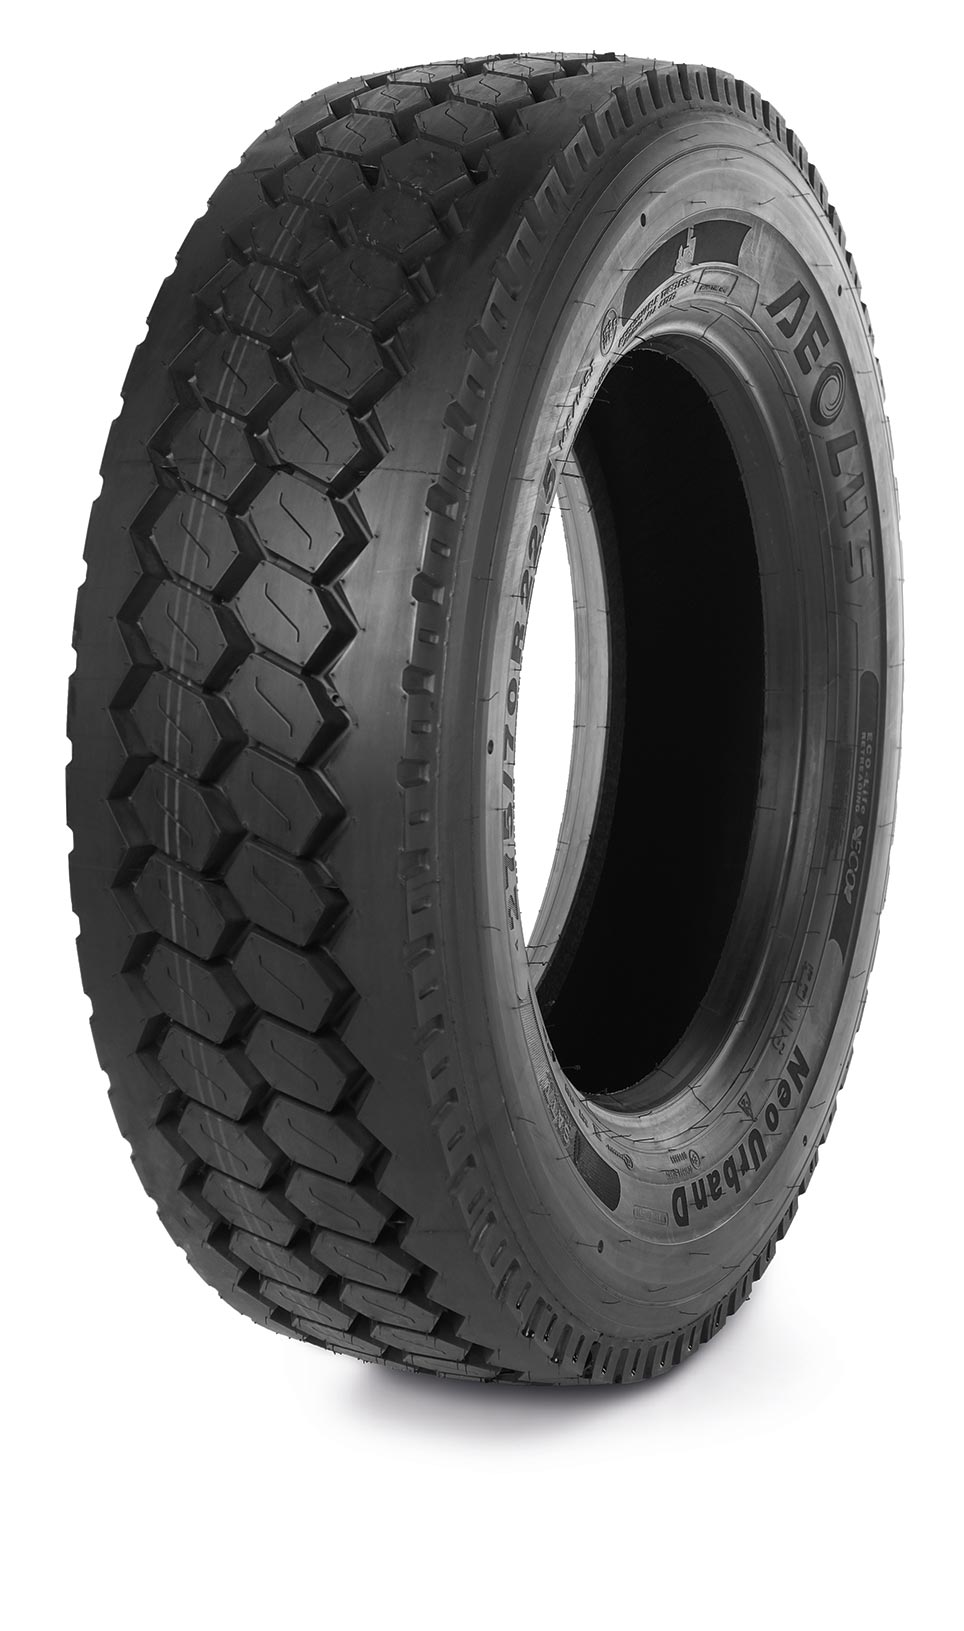 Aeolus adds Neo bus tyre to commercial vehicle tyre range